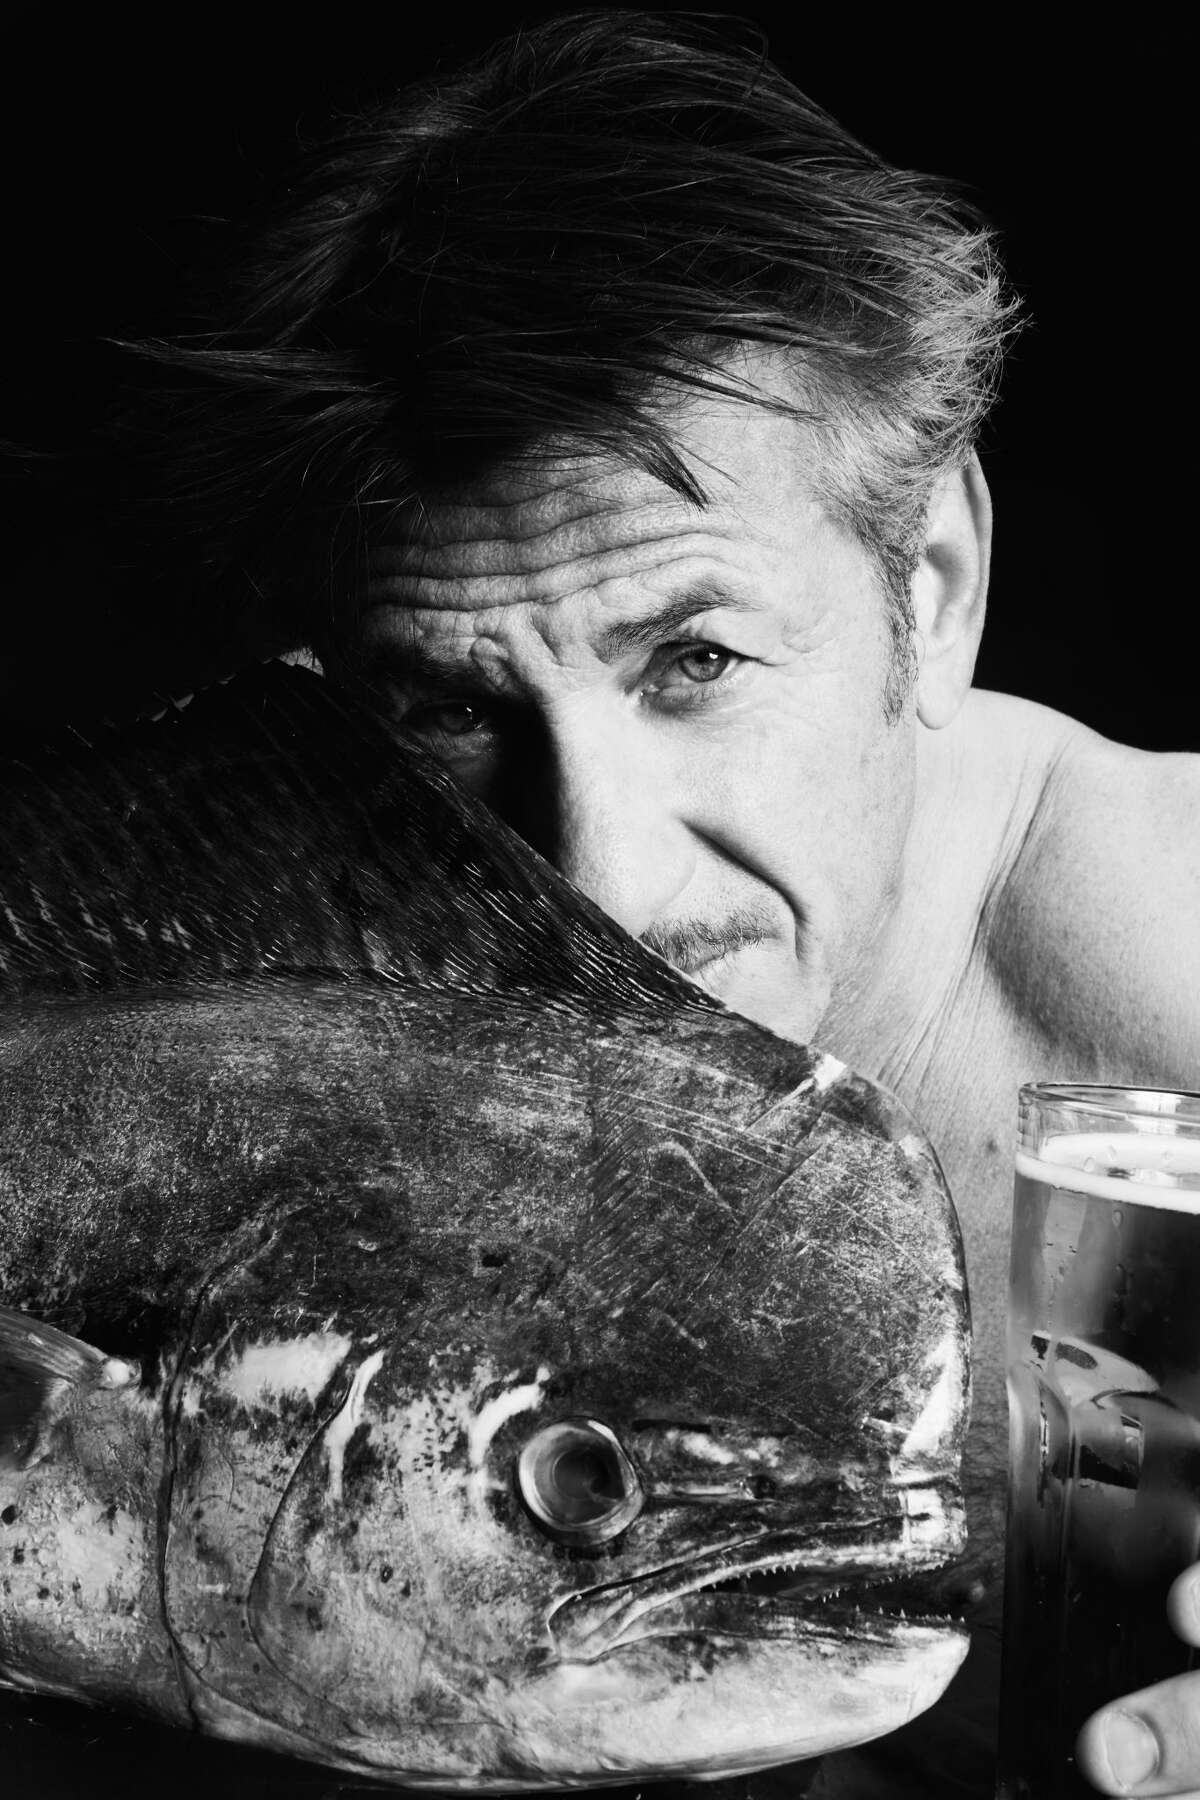 Sean Penn poses with mahi mahi as part of the Fishlove photo campaign to stem overfishing in European waters.